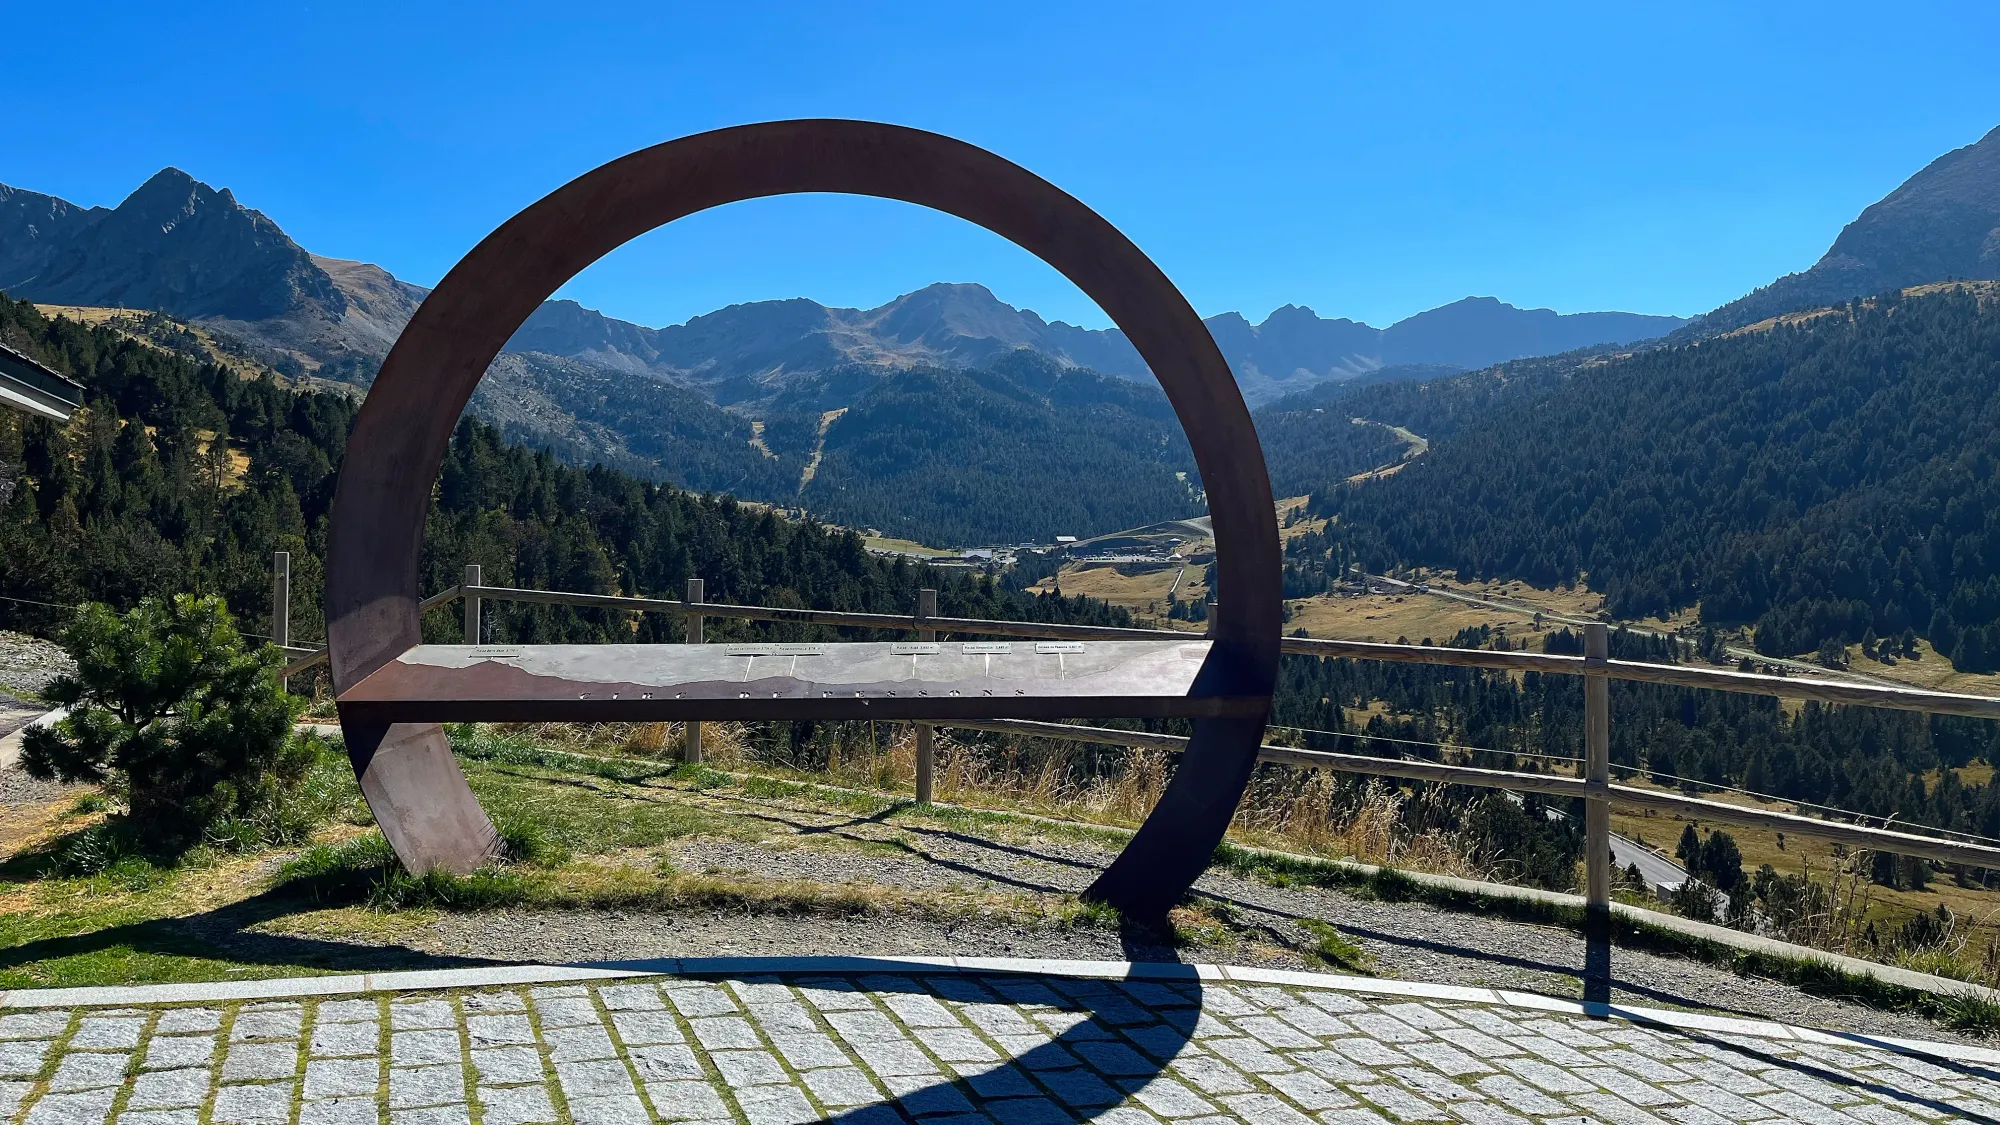 Round frame pointed out over a valley surrounded by mountains